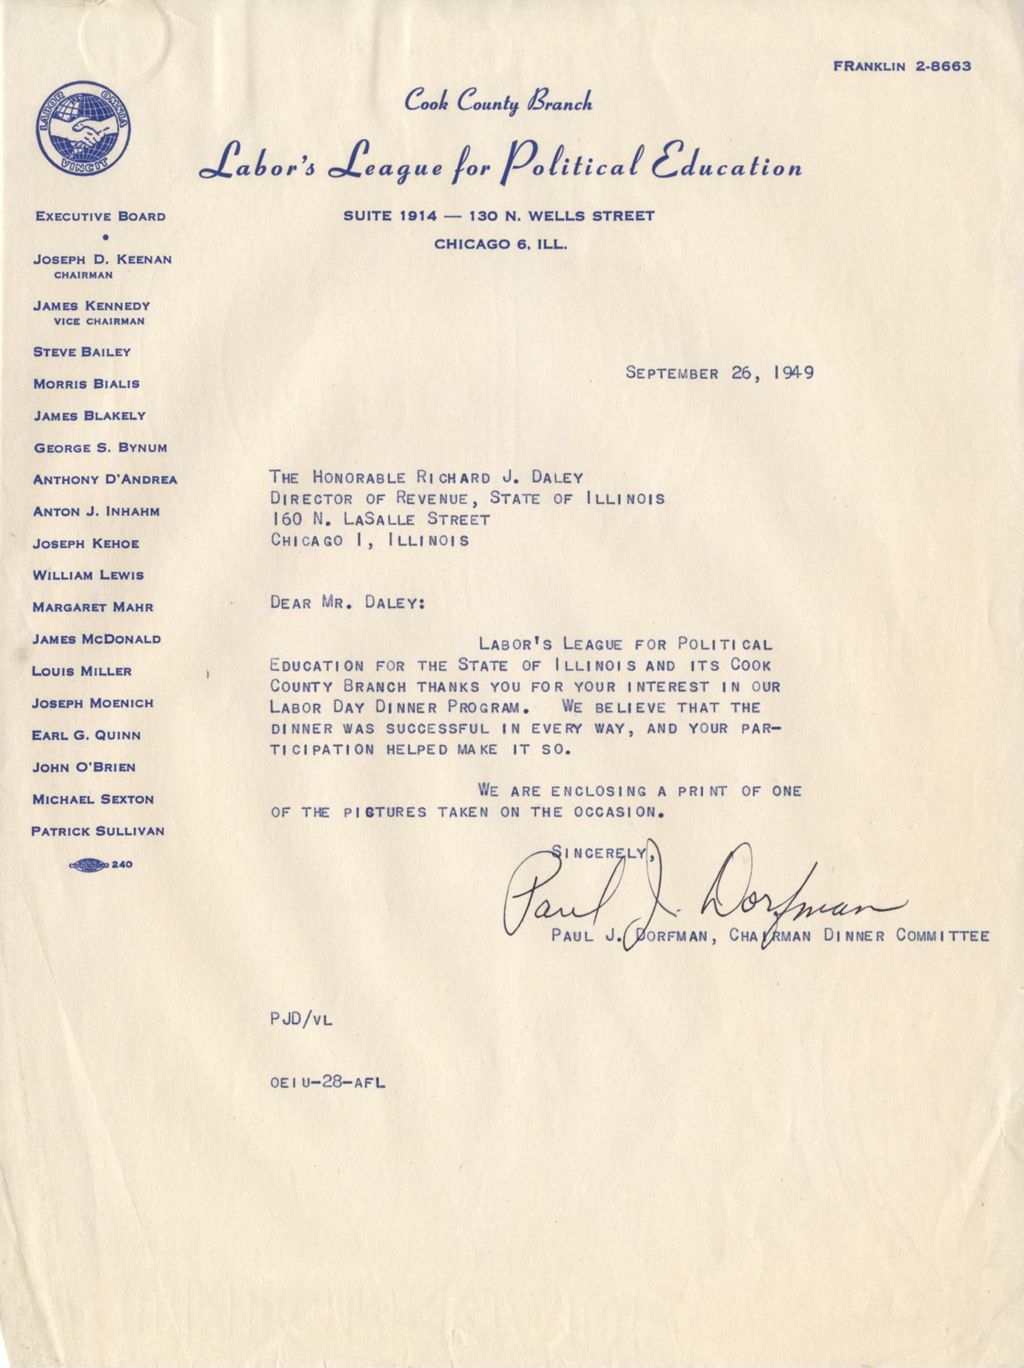 Letter from Paul J. Dorfman to Richard J. Daley, Director of Revenue